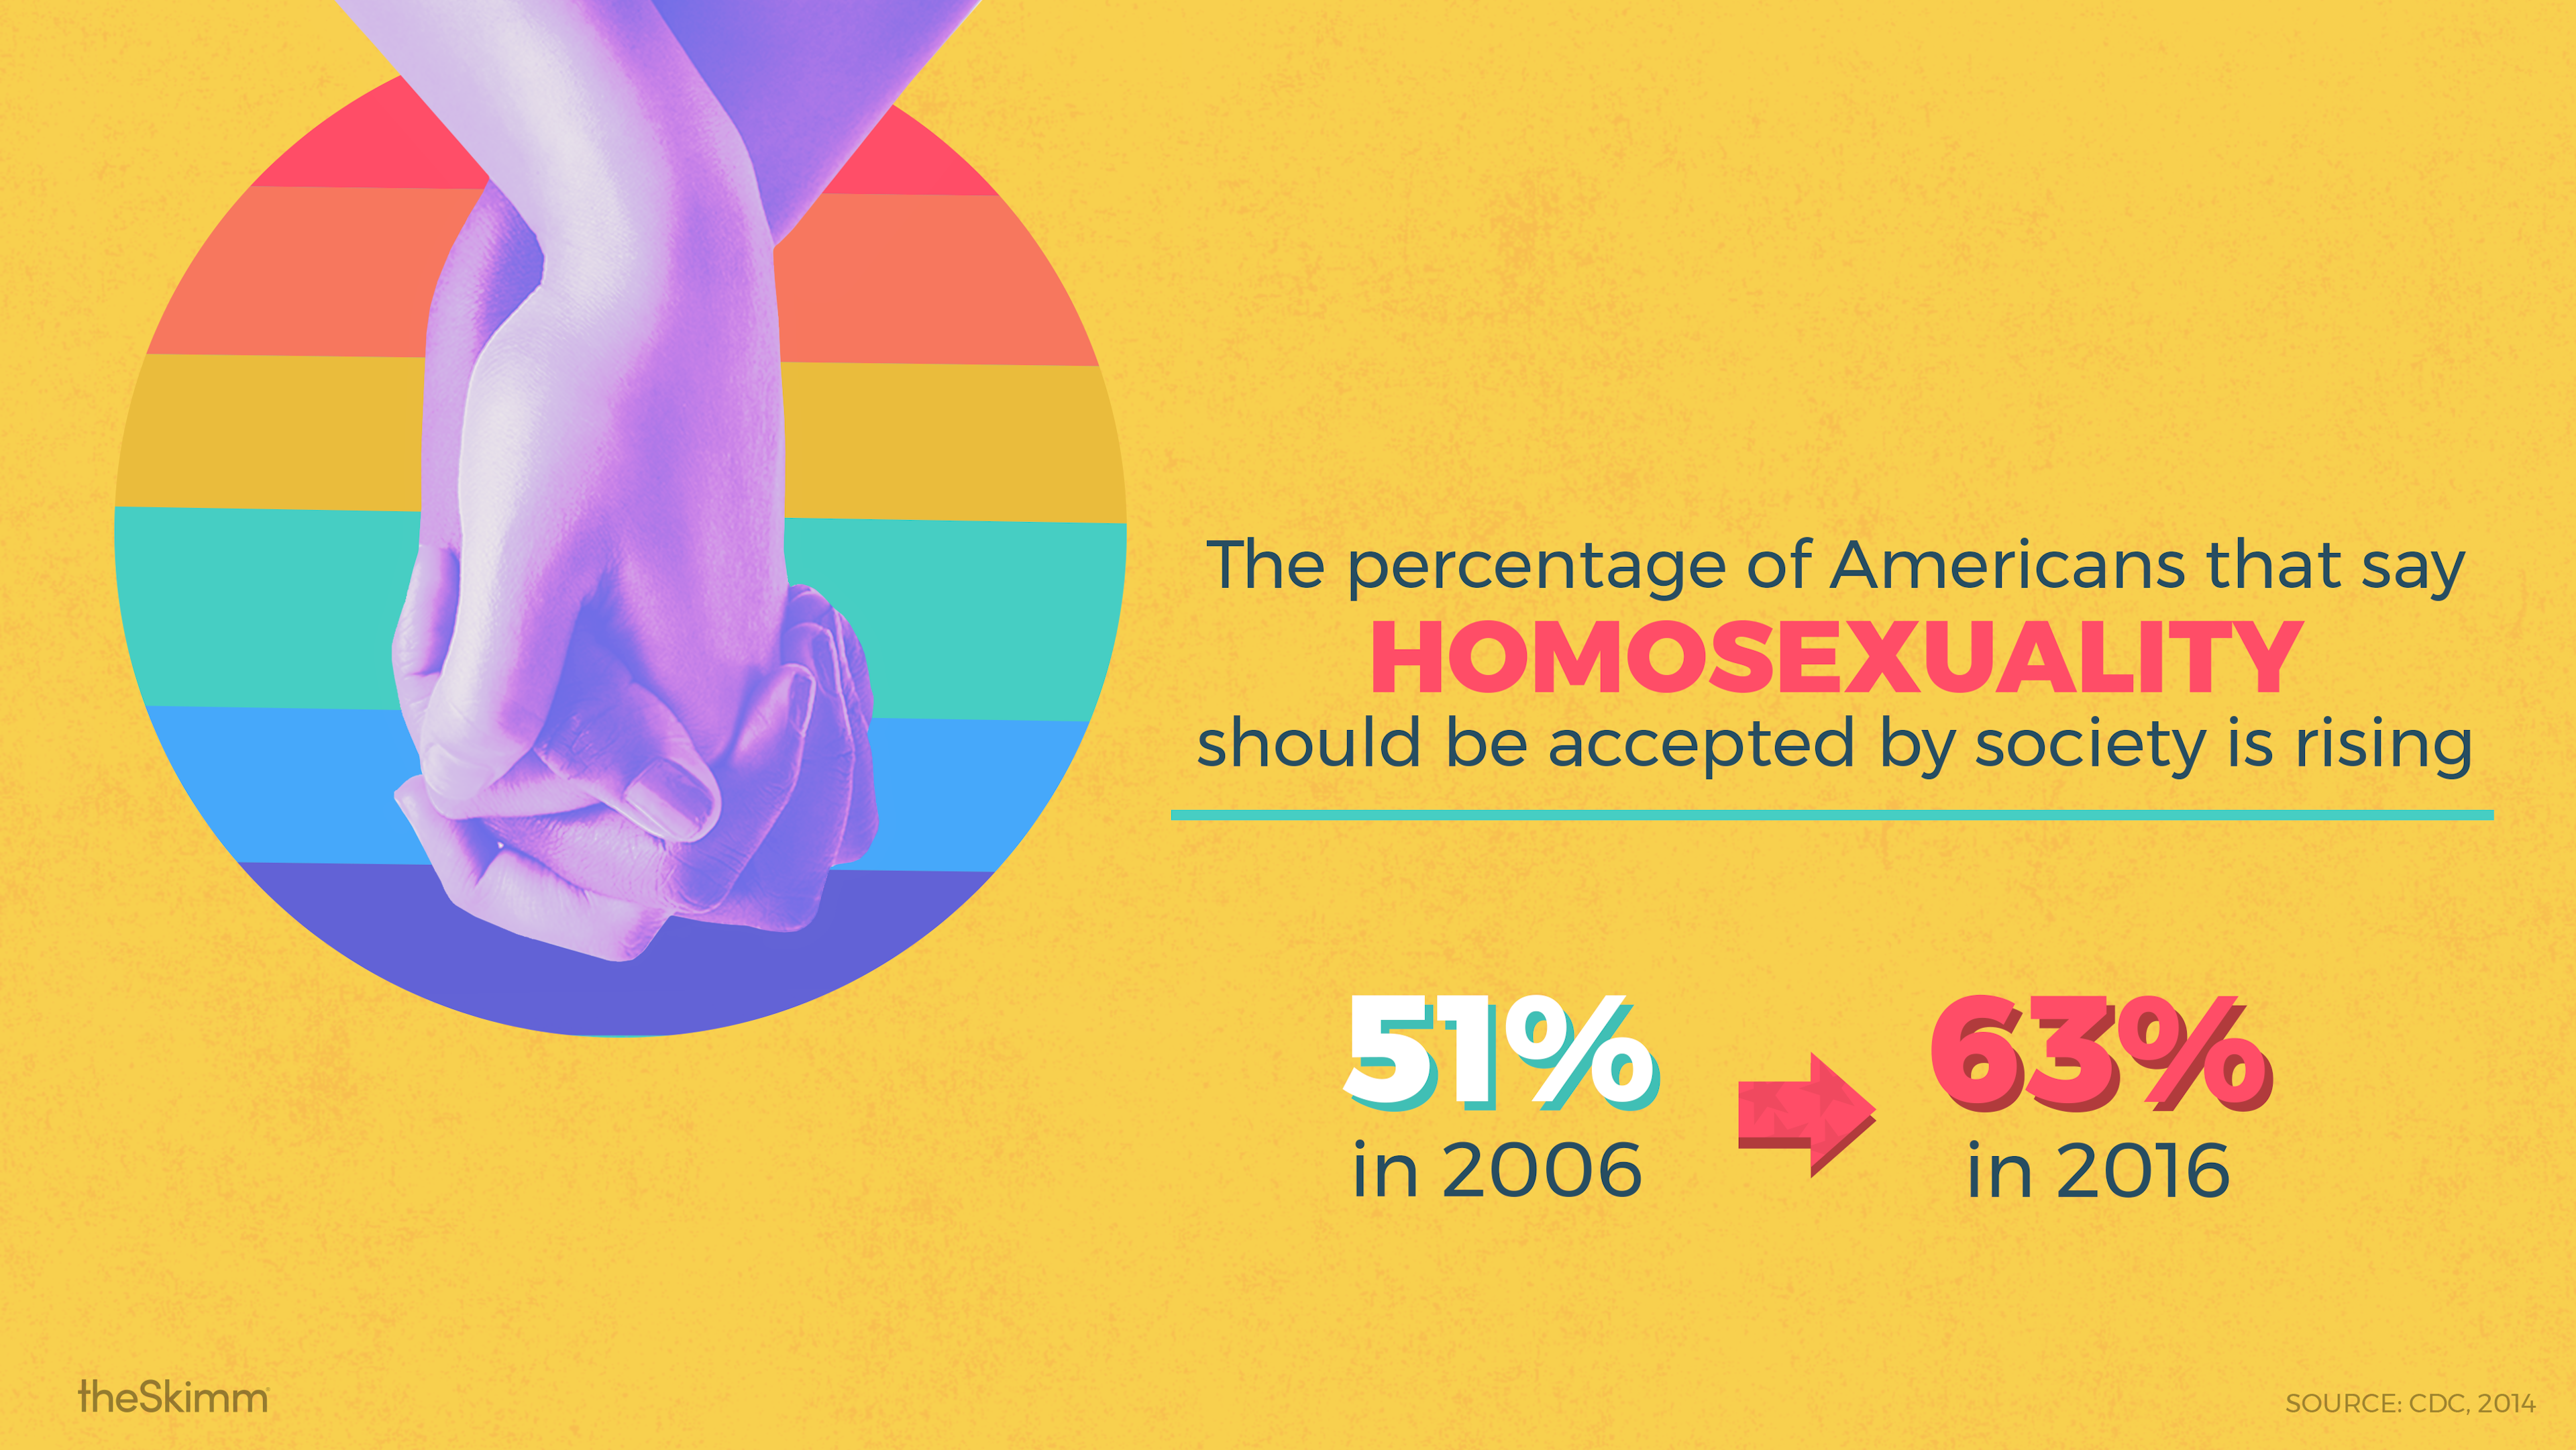 The percentage of Americans that say homosexuality should be accepted by society is rising. From 51% in 2006 to 63% in 2016.